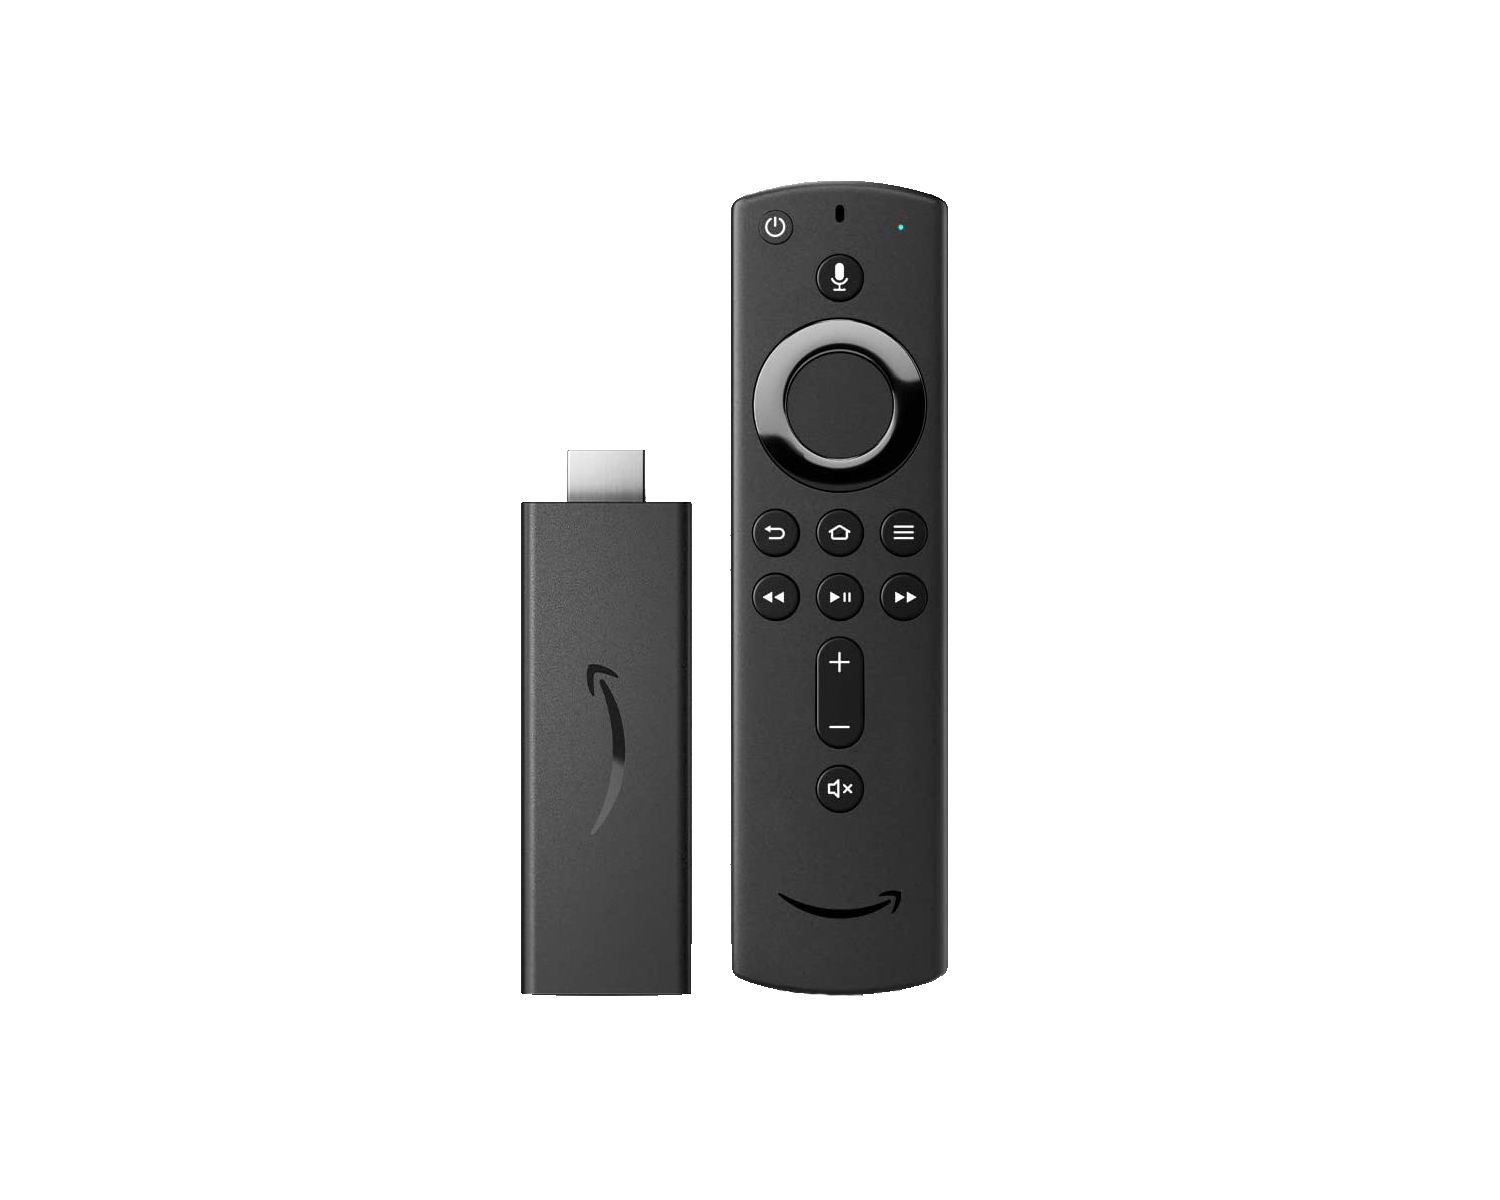 Fire TV Stick 4K streaming device with latest Alexa Voice